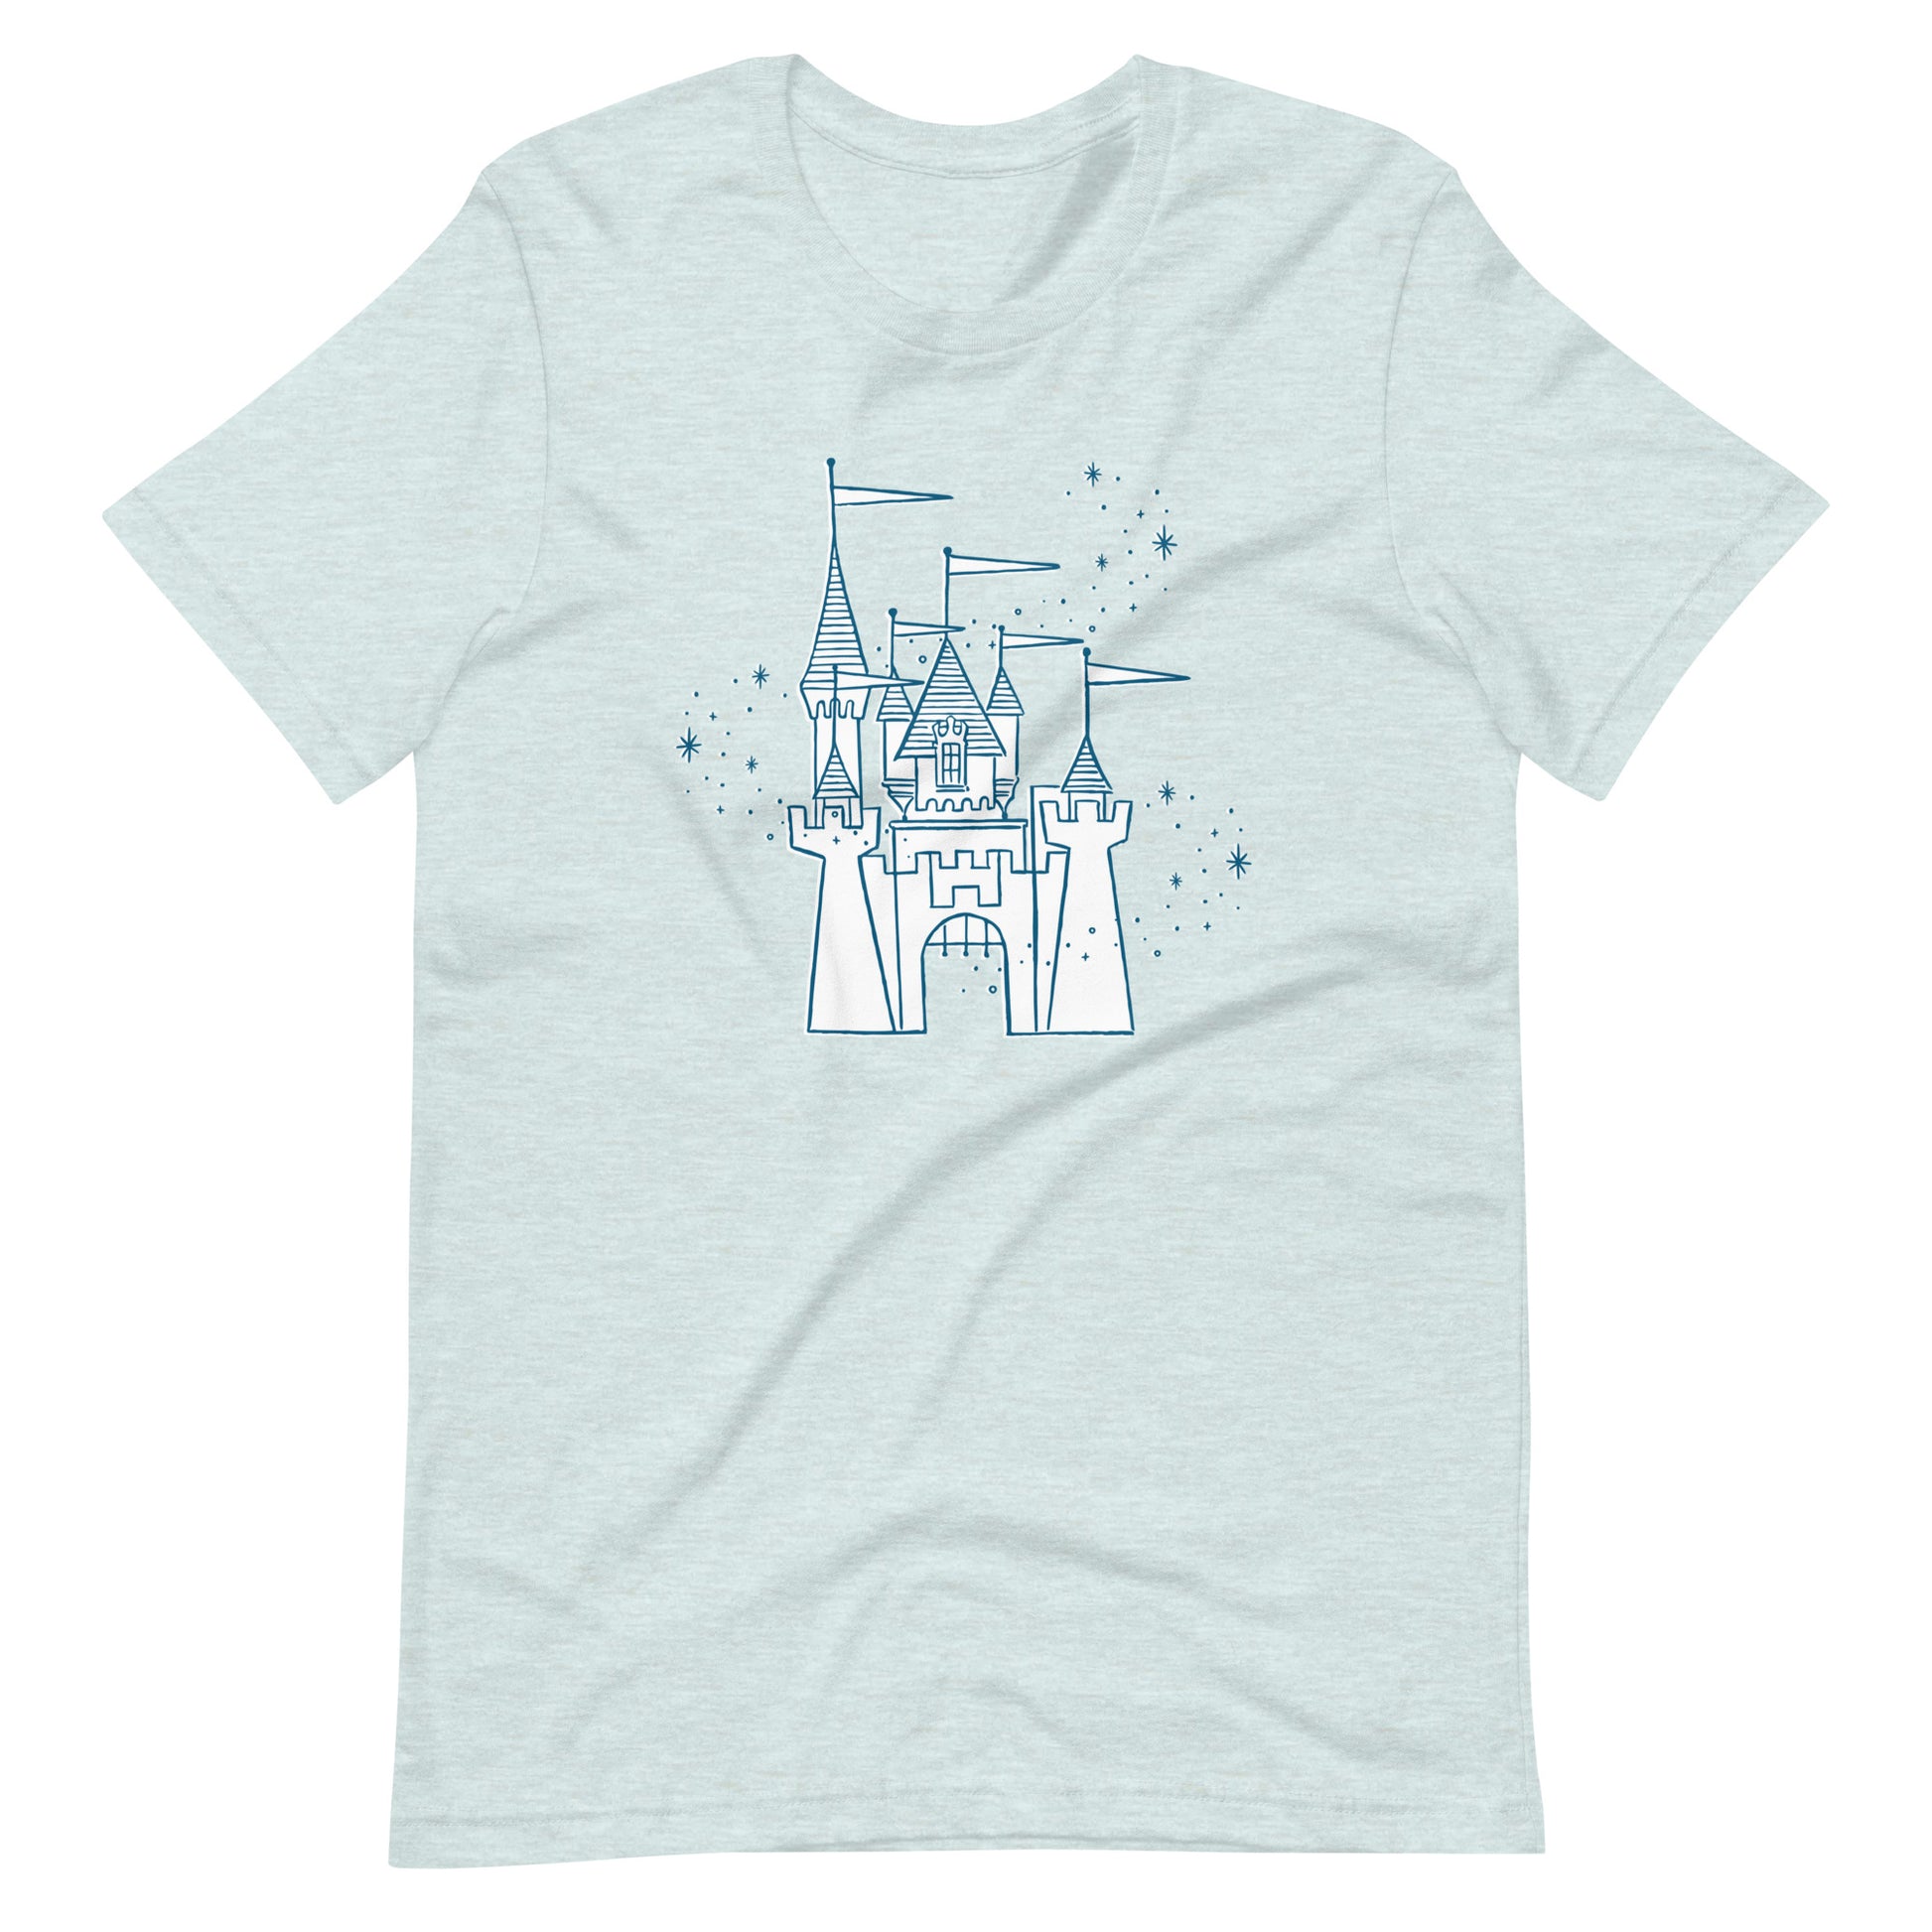 Light blue shirt printed with vintage style sketch of the Disneyland Castle and pixie dust above the castle.